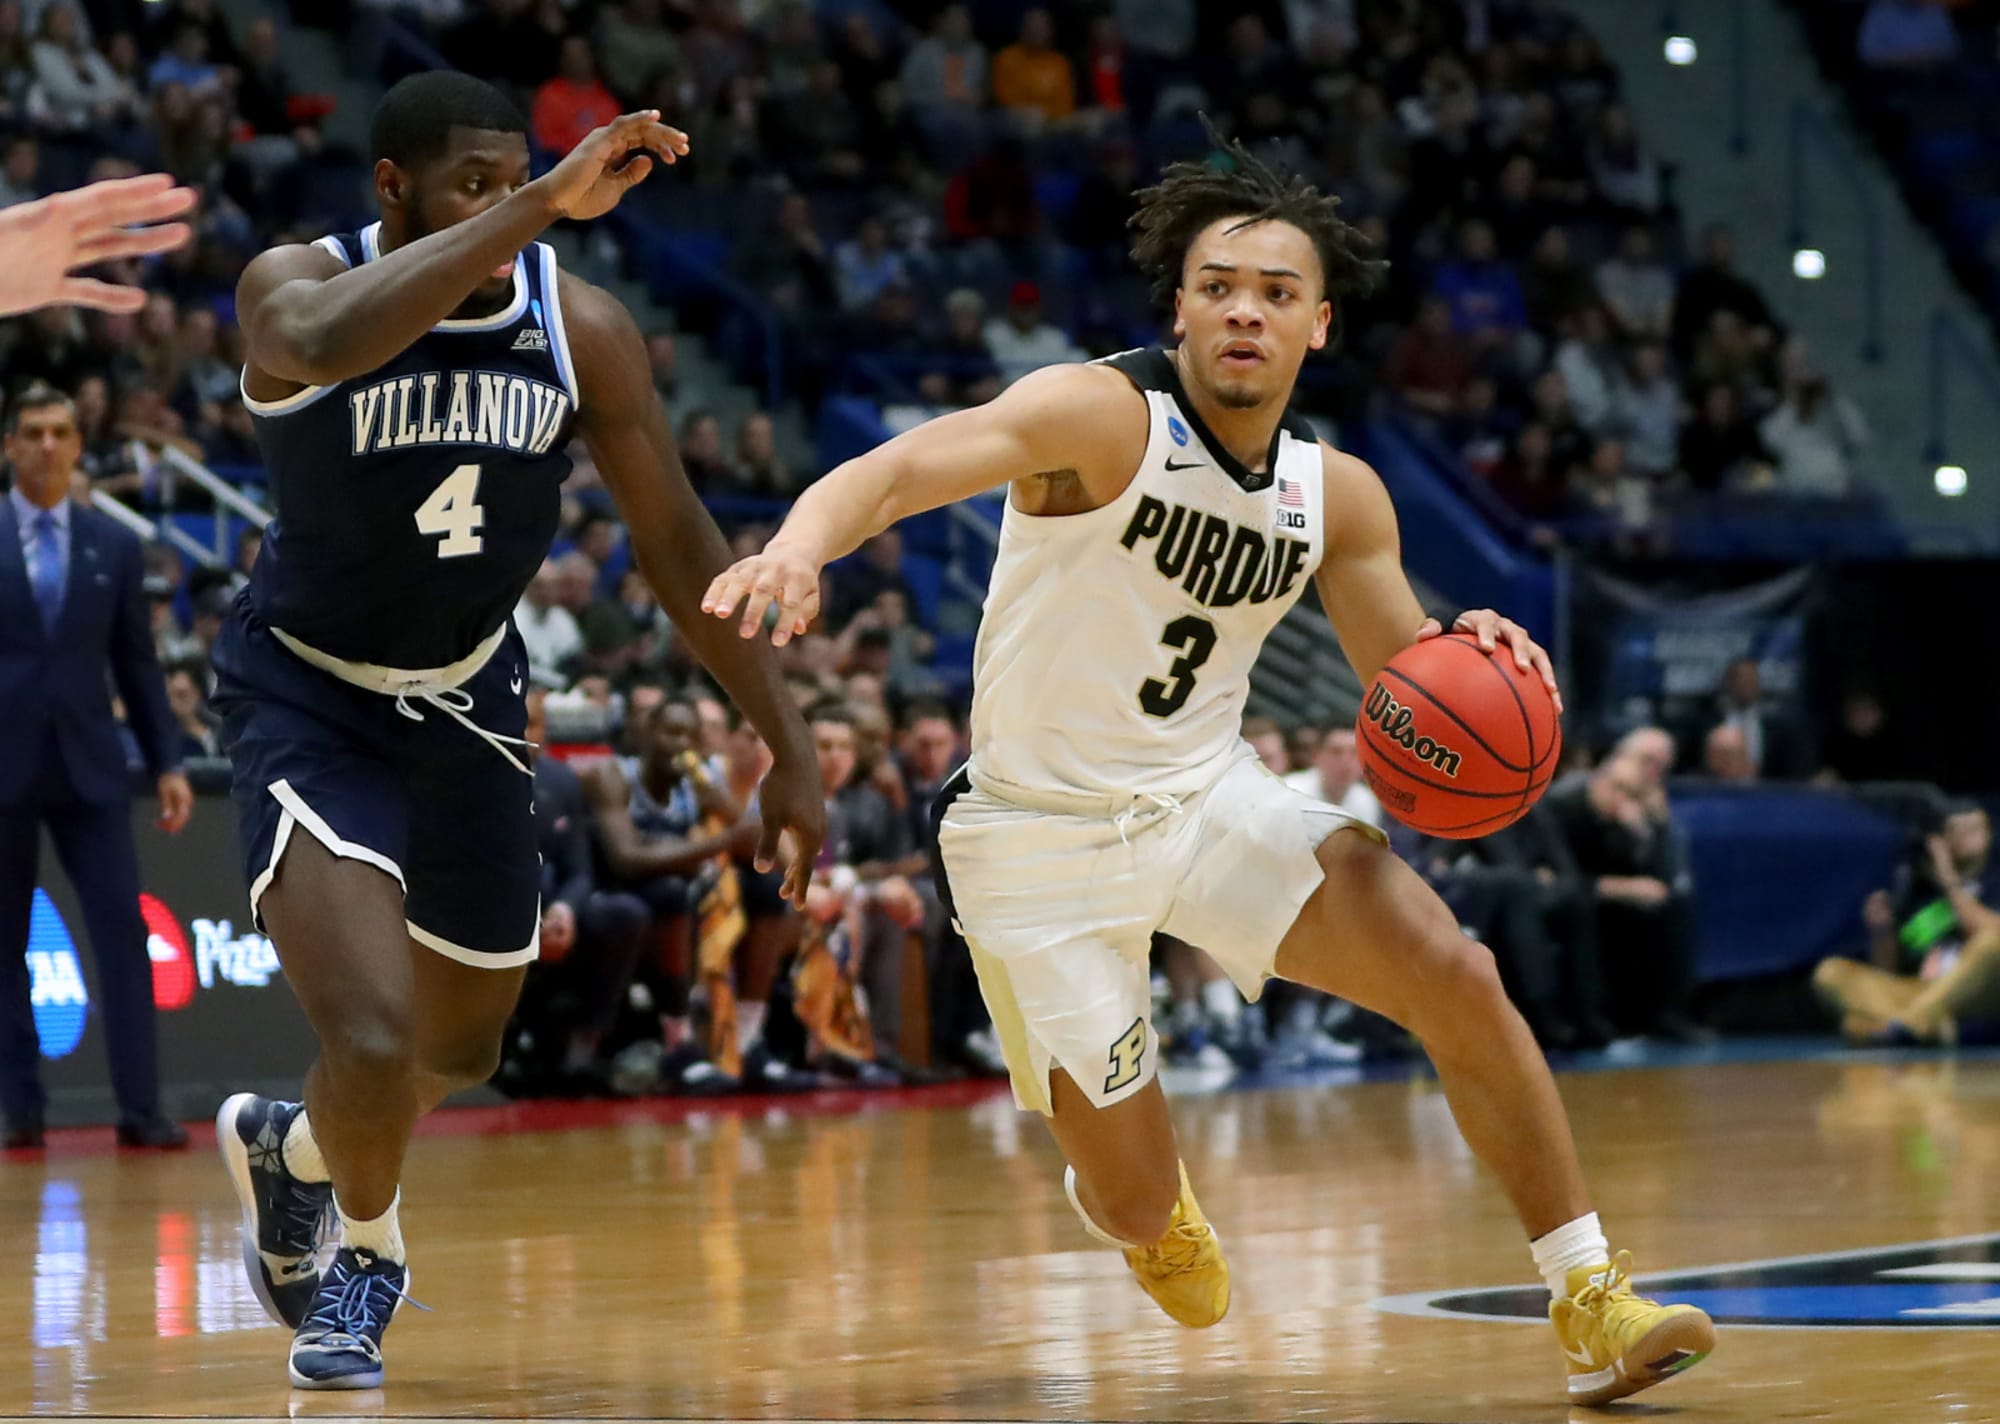 Carsen Edwards may be playing his way into first round of NBA draft